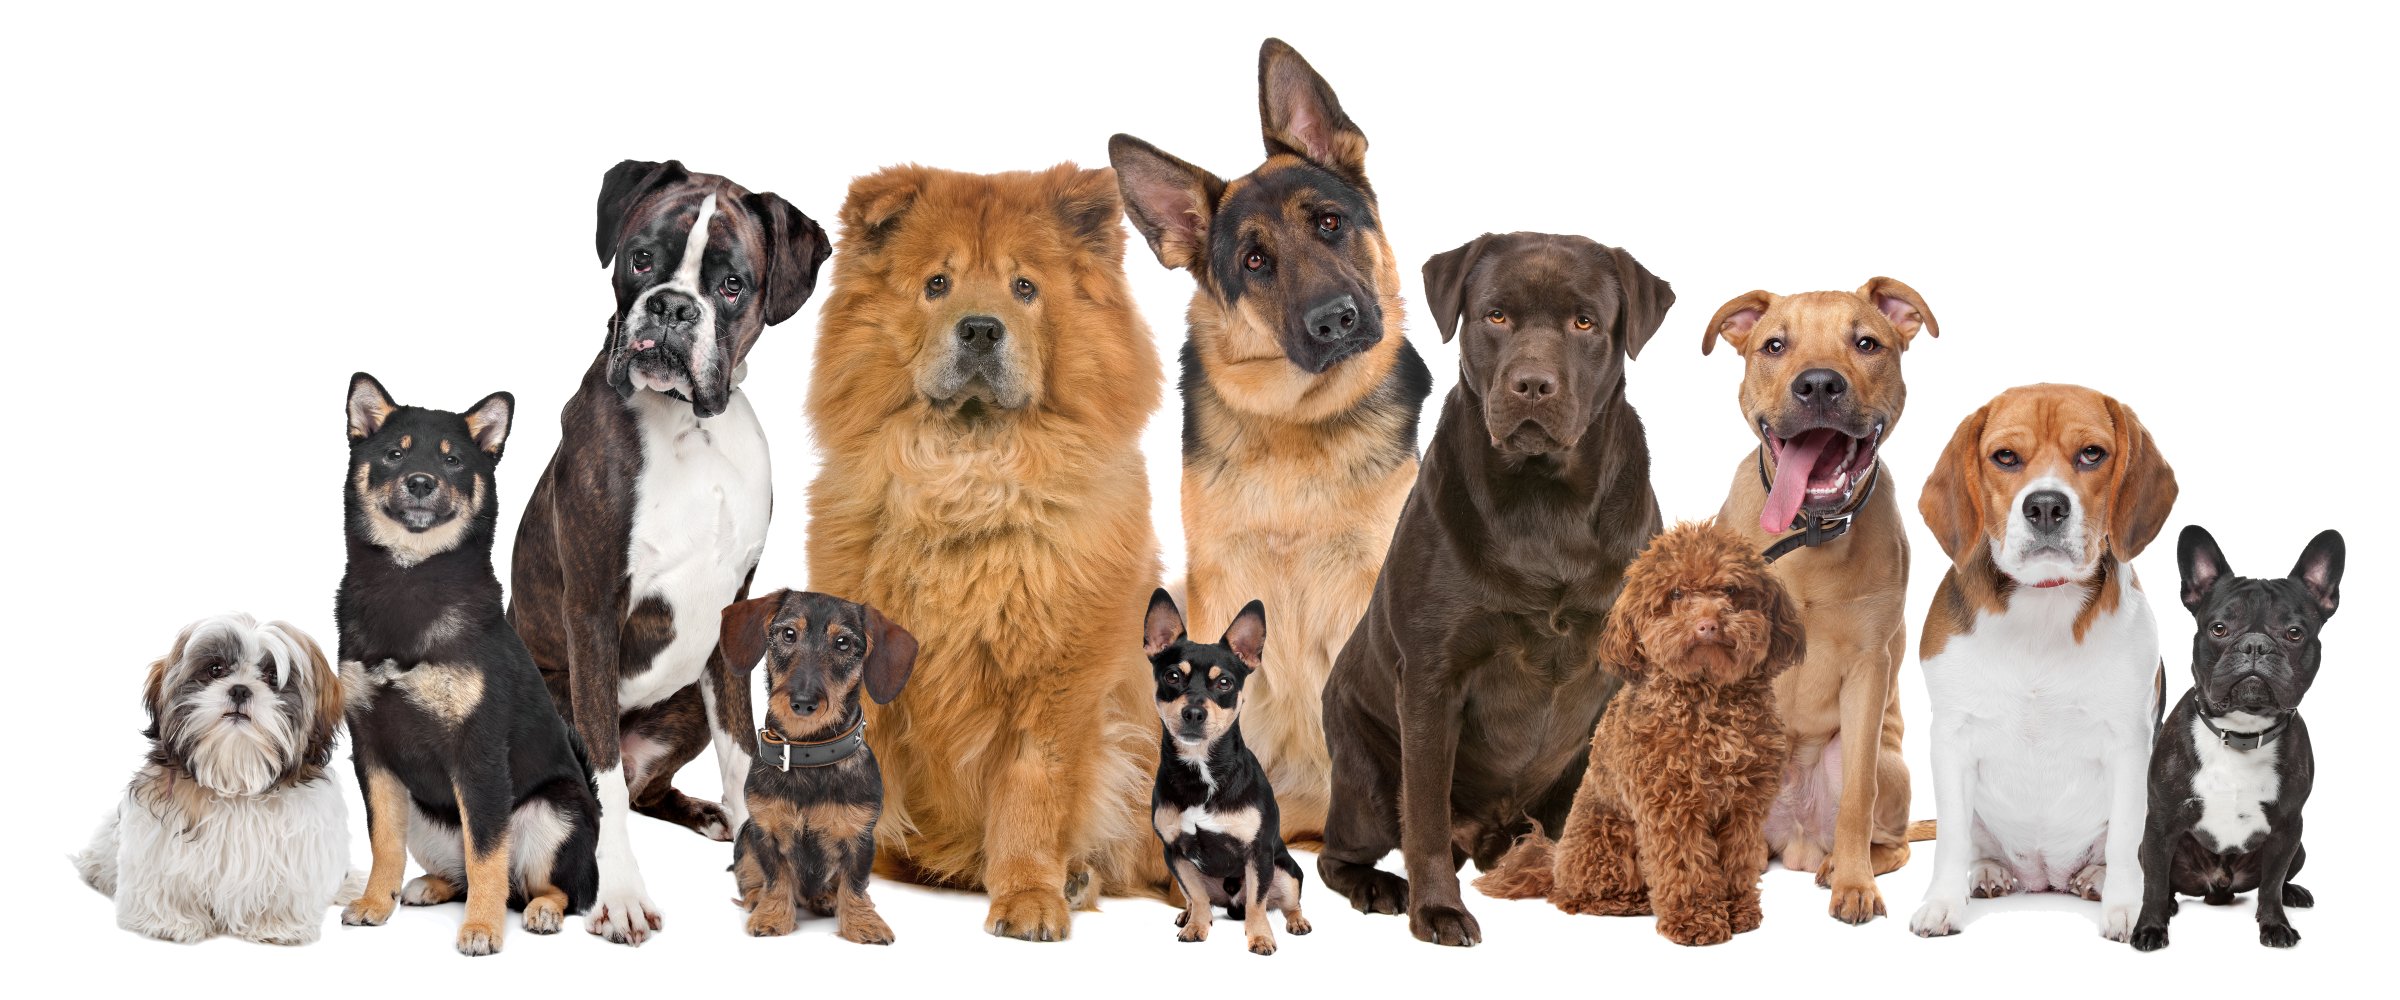 Photo: Group of dogs of different sizes and breeds